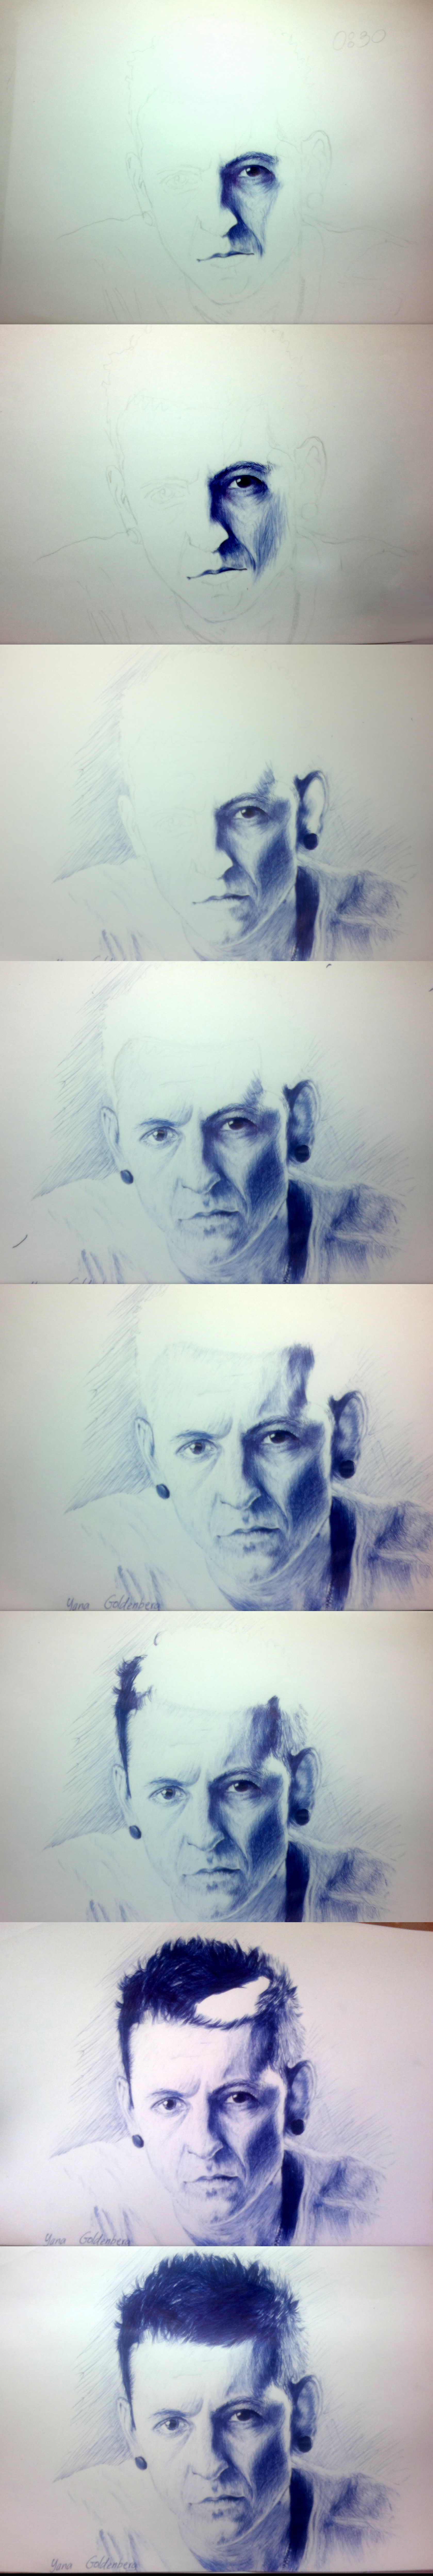 Drawing Chester Bennington with a pen